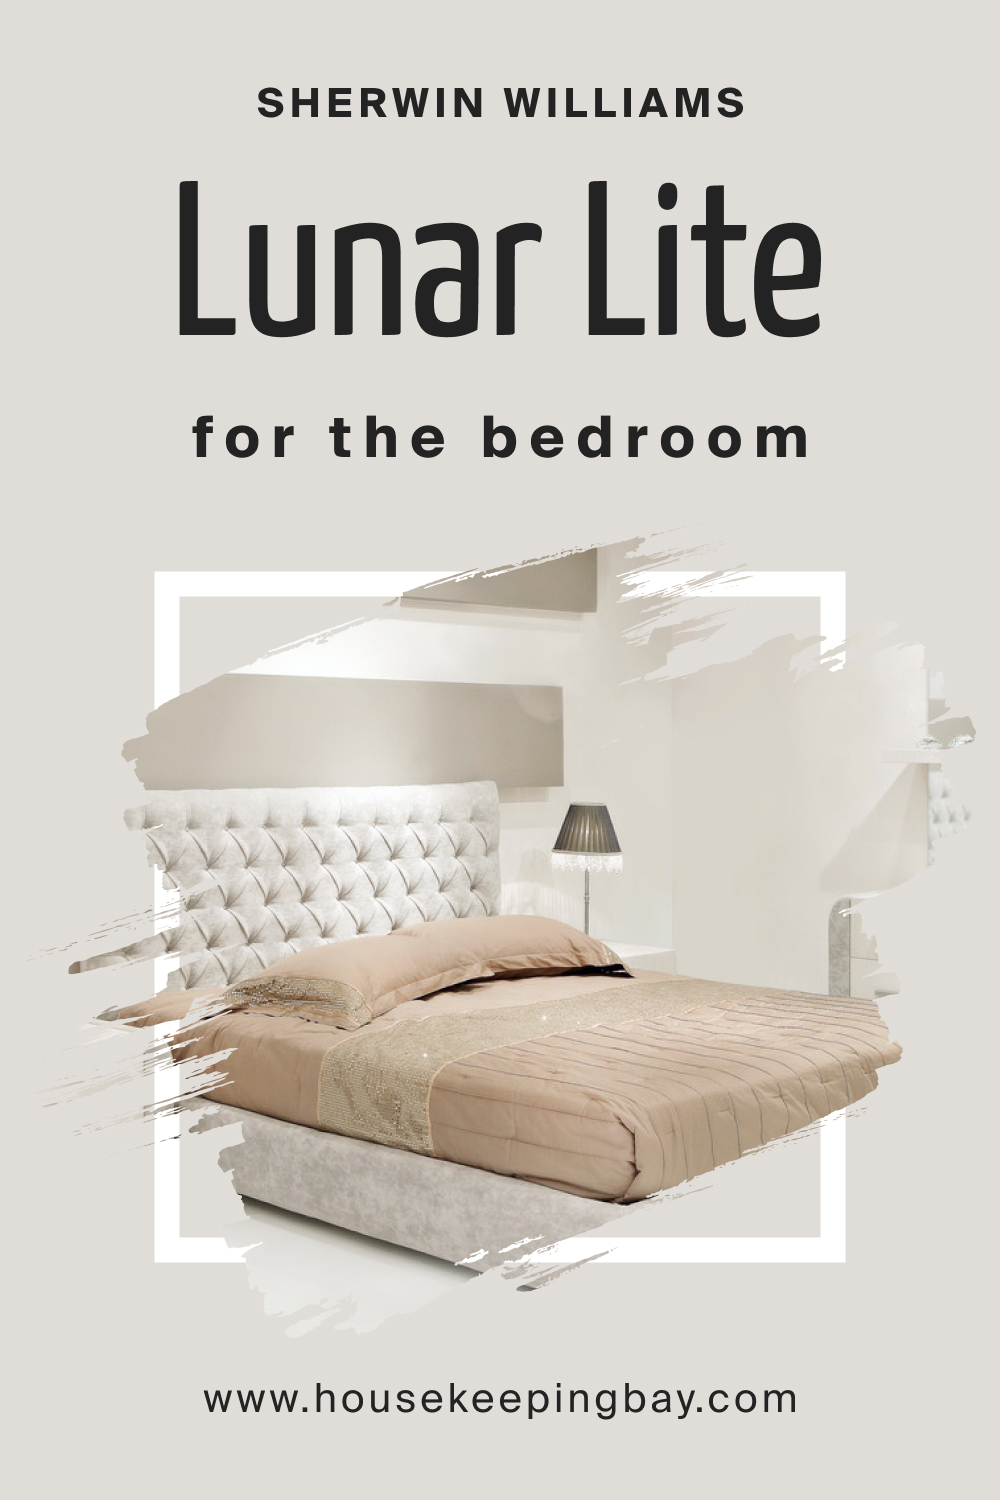 Sherwin Williams. SW 9546 Lunar Lite For the bedroom